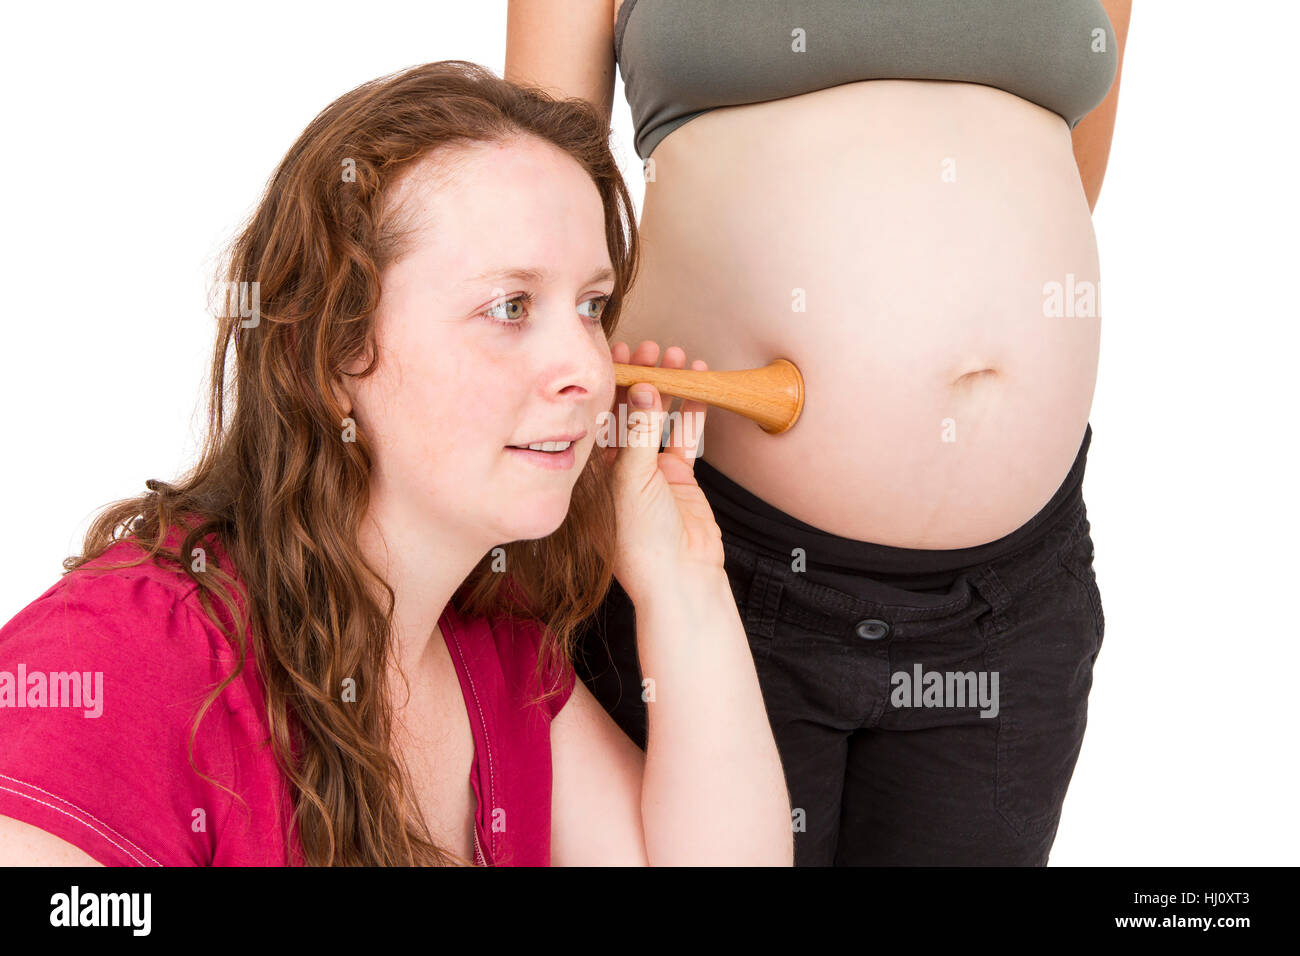 midwife listening at human belly Stock Photo